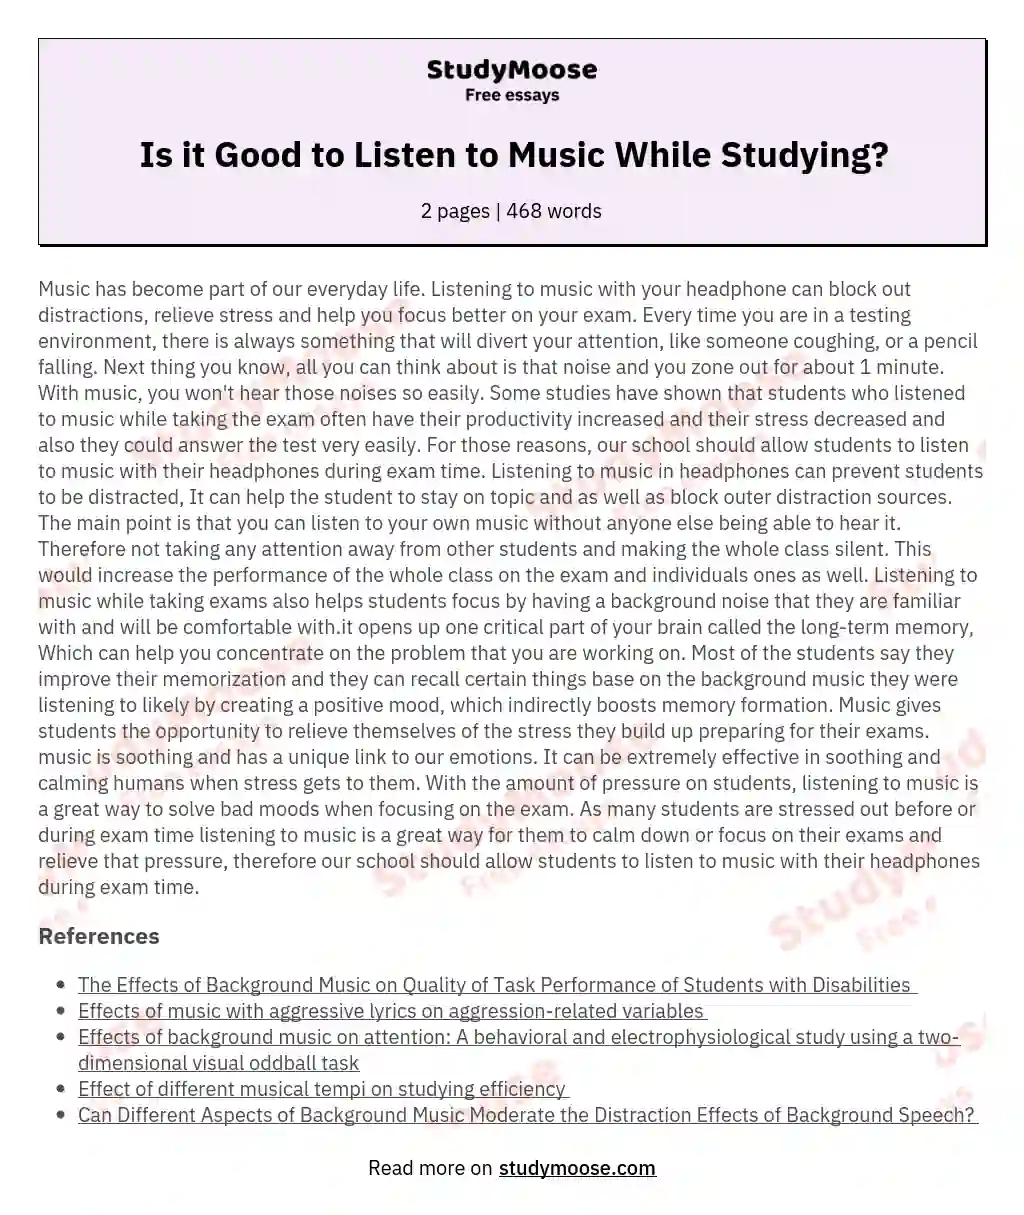 Is it Good to Listen to Music While Studying? essay